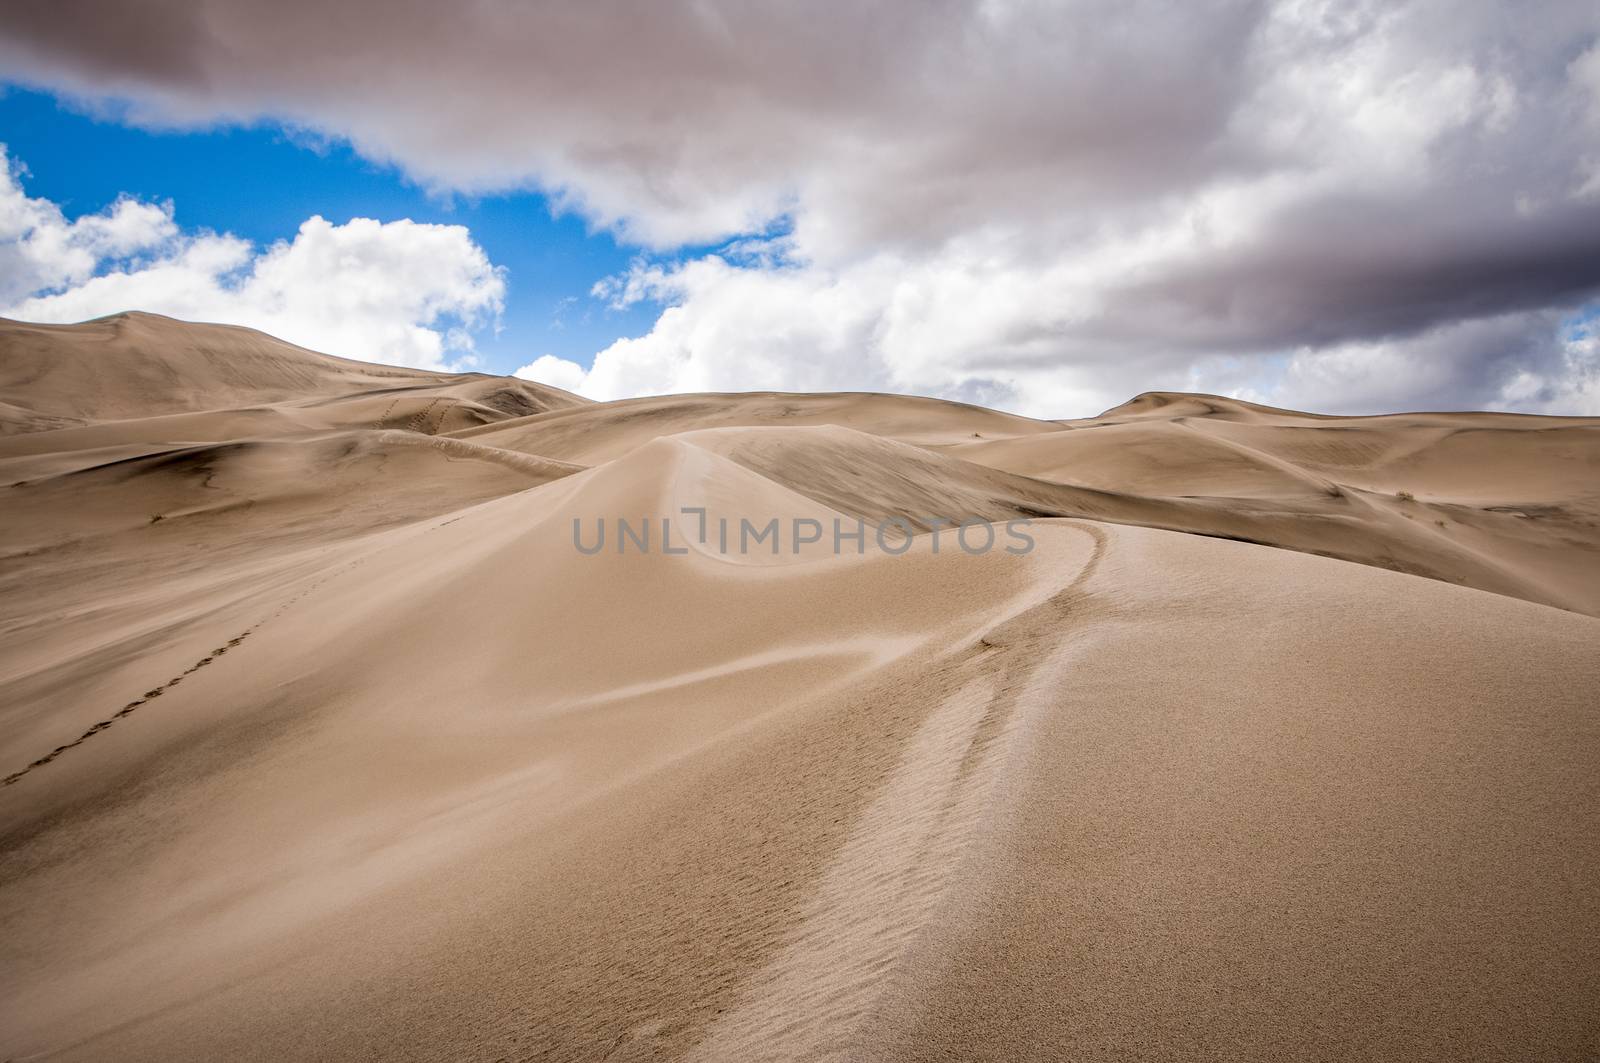 Eureka Valley Sand Dunes in Death Valley National Park, California by Njean